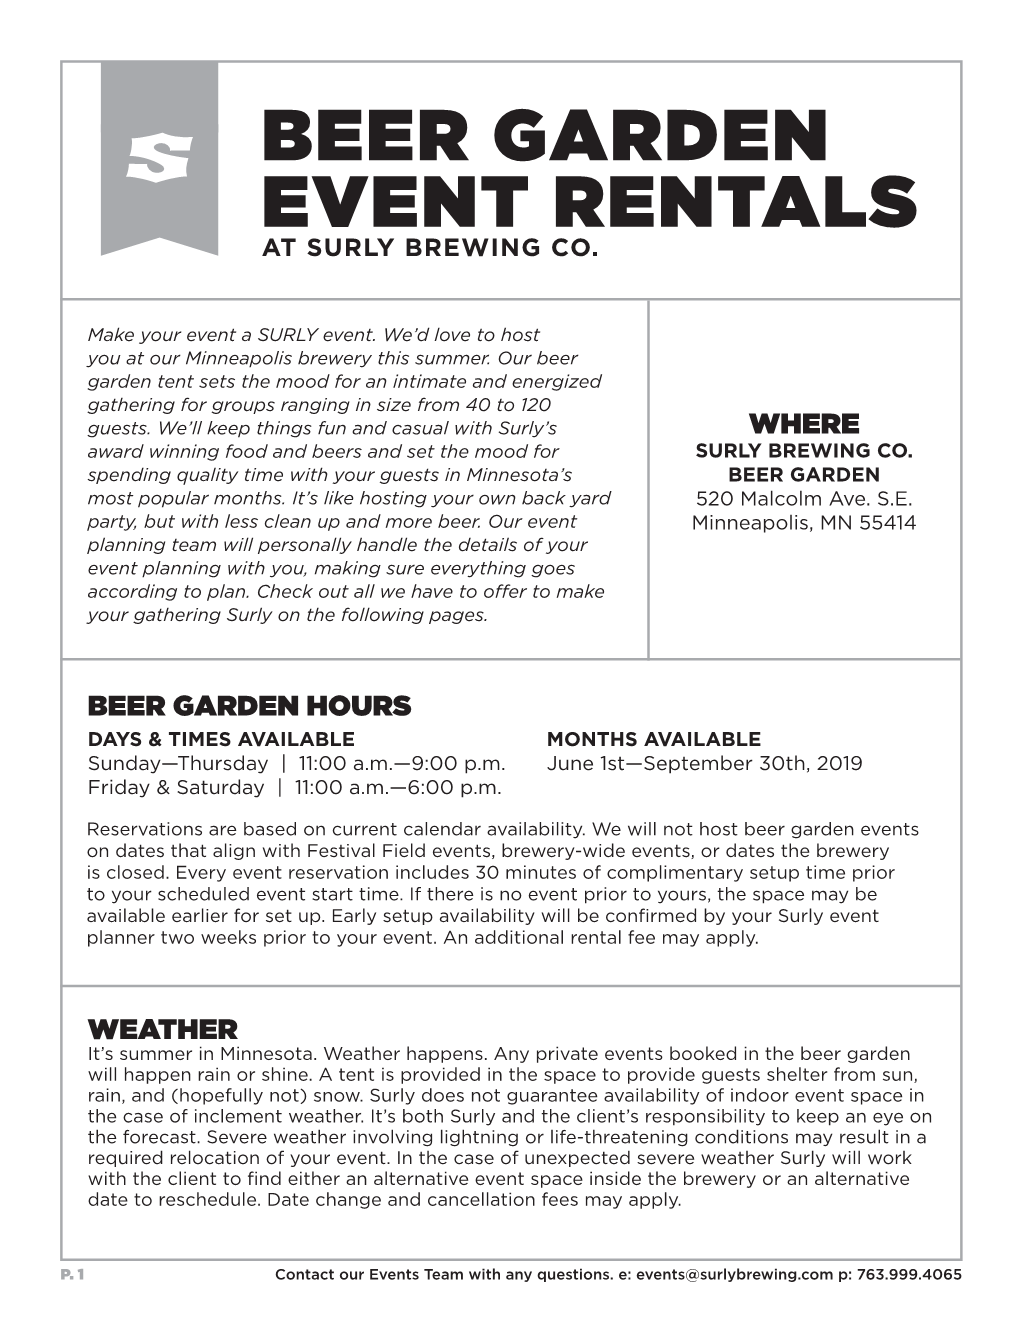 Beer Garden Event Rentals at Surly Brewing Co